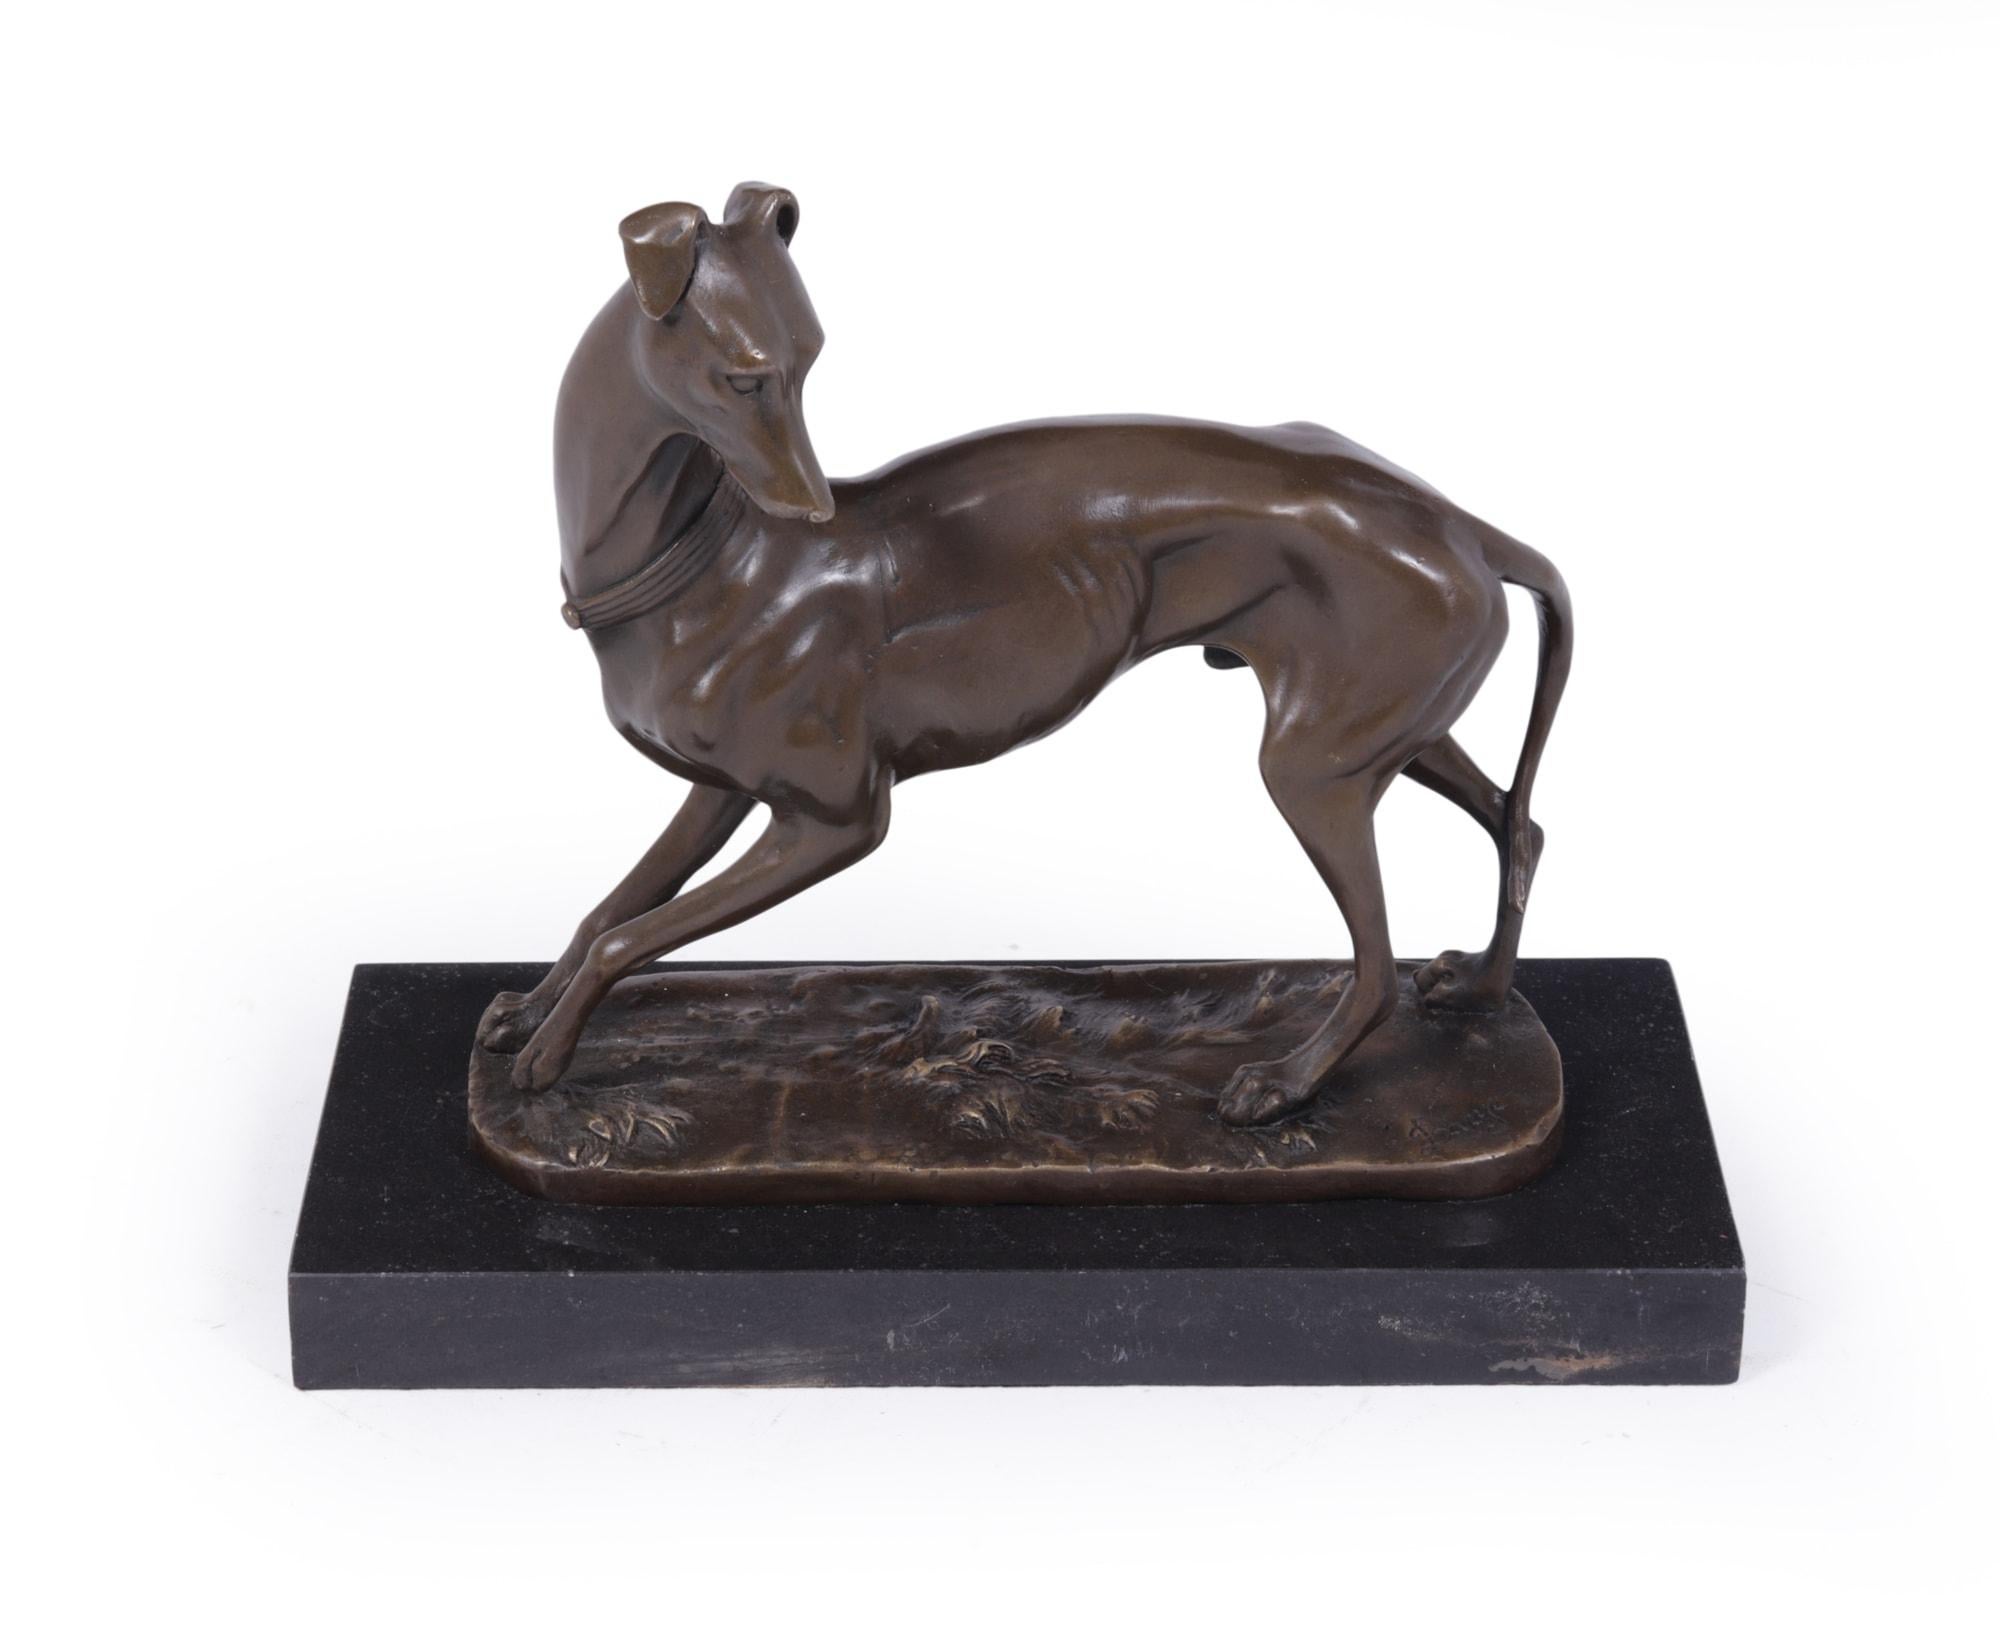 Art Deco Whippet sculpture in bronze by Bayre
Antoine-Louis Bayre ( 1795- 1875 ) The Whippet, this bronze was cast around 1880 and signed Bayre fitted to black marble base, great quality casting, great colour and patina to bronze. Bayre was born in